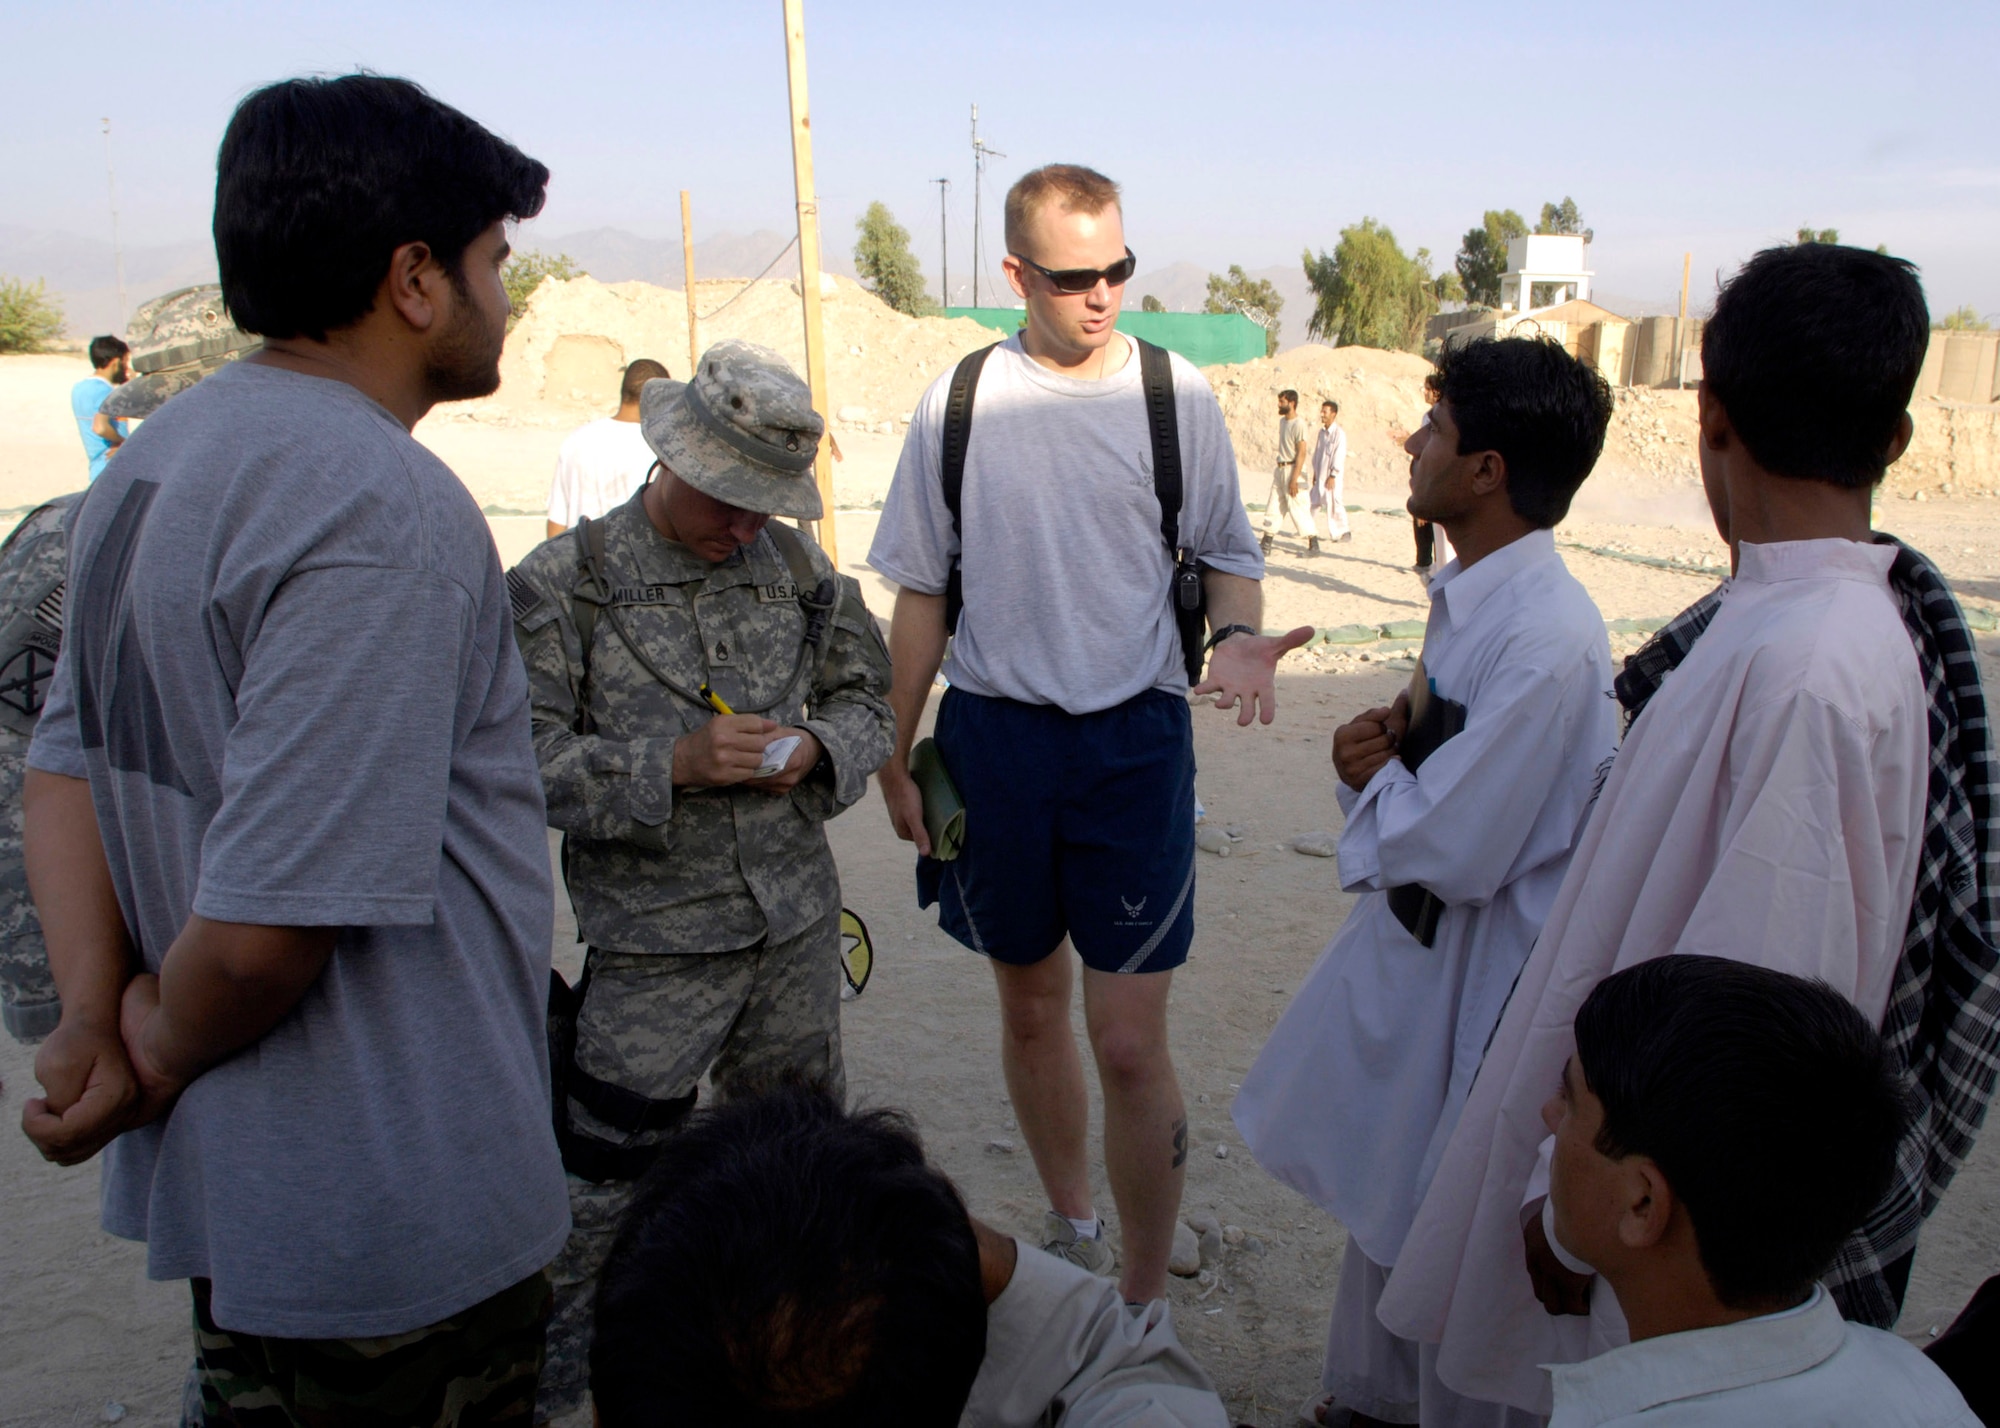 Capt. Matthew Brennan (center) talks with Jahedi, the Afghan director of the Laghman Youth Society about construction projects in the province during a weekly volleyball game hosted by Airmen and Soldiers Aug. 26 at Forward Operating Base Mehtar Lam, located in Afghanistan's Laghman Province. The volleyball games are designed to bring area high school students from the province's five districts, onto the base in order to meet and interact with military members in a friendly atmosphere. Captain Brennan is a Provincial Reconstruction Team member and a civil engineer. (U.S. Air Force photo/Master Sgt. Jim Varhegyi) 
